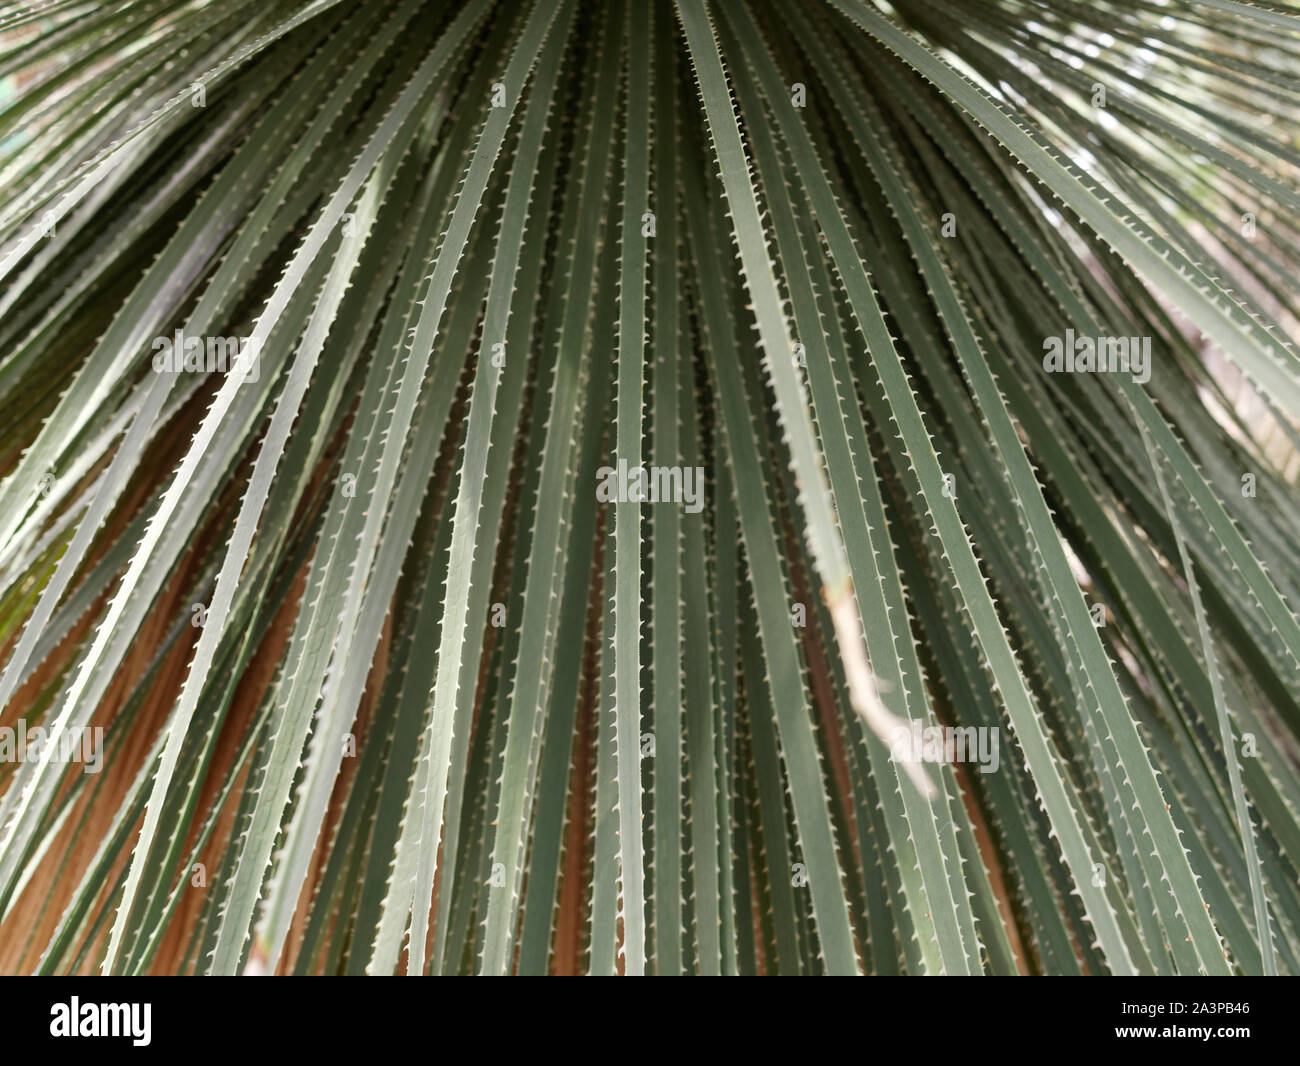 Abstract image of green leaves of Dasylirion succulent plant Stock Photo